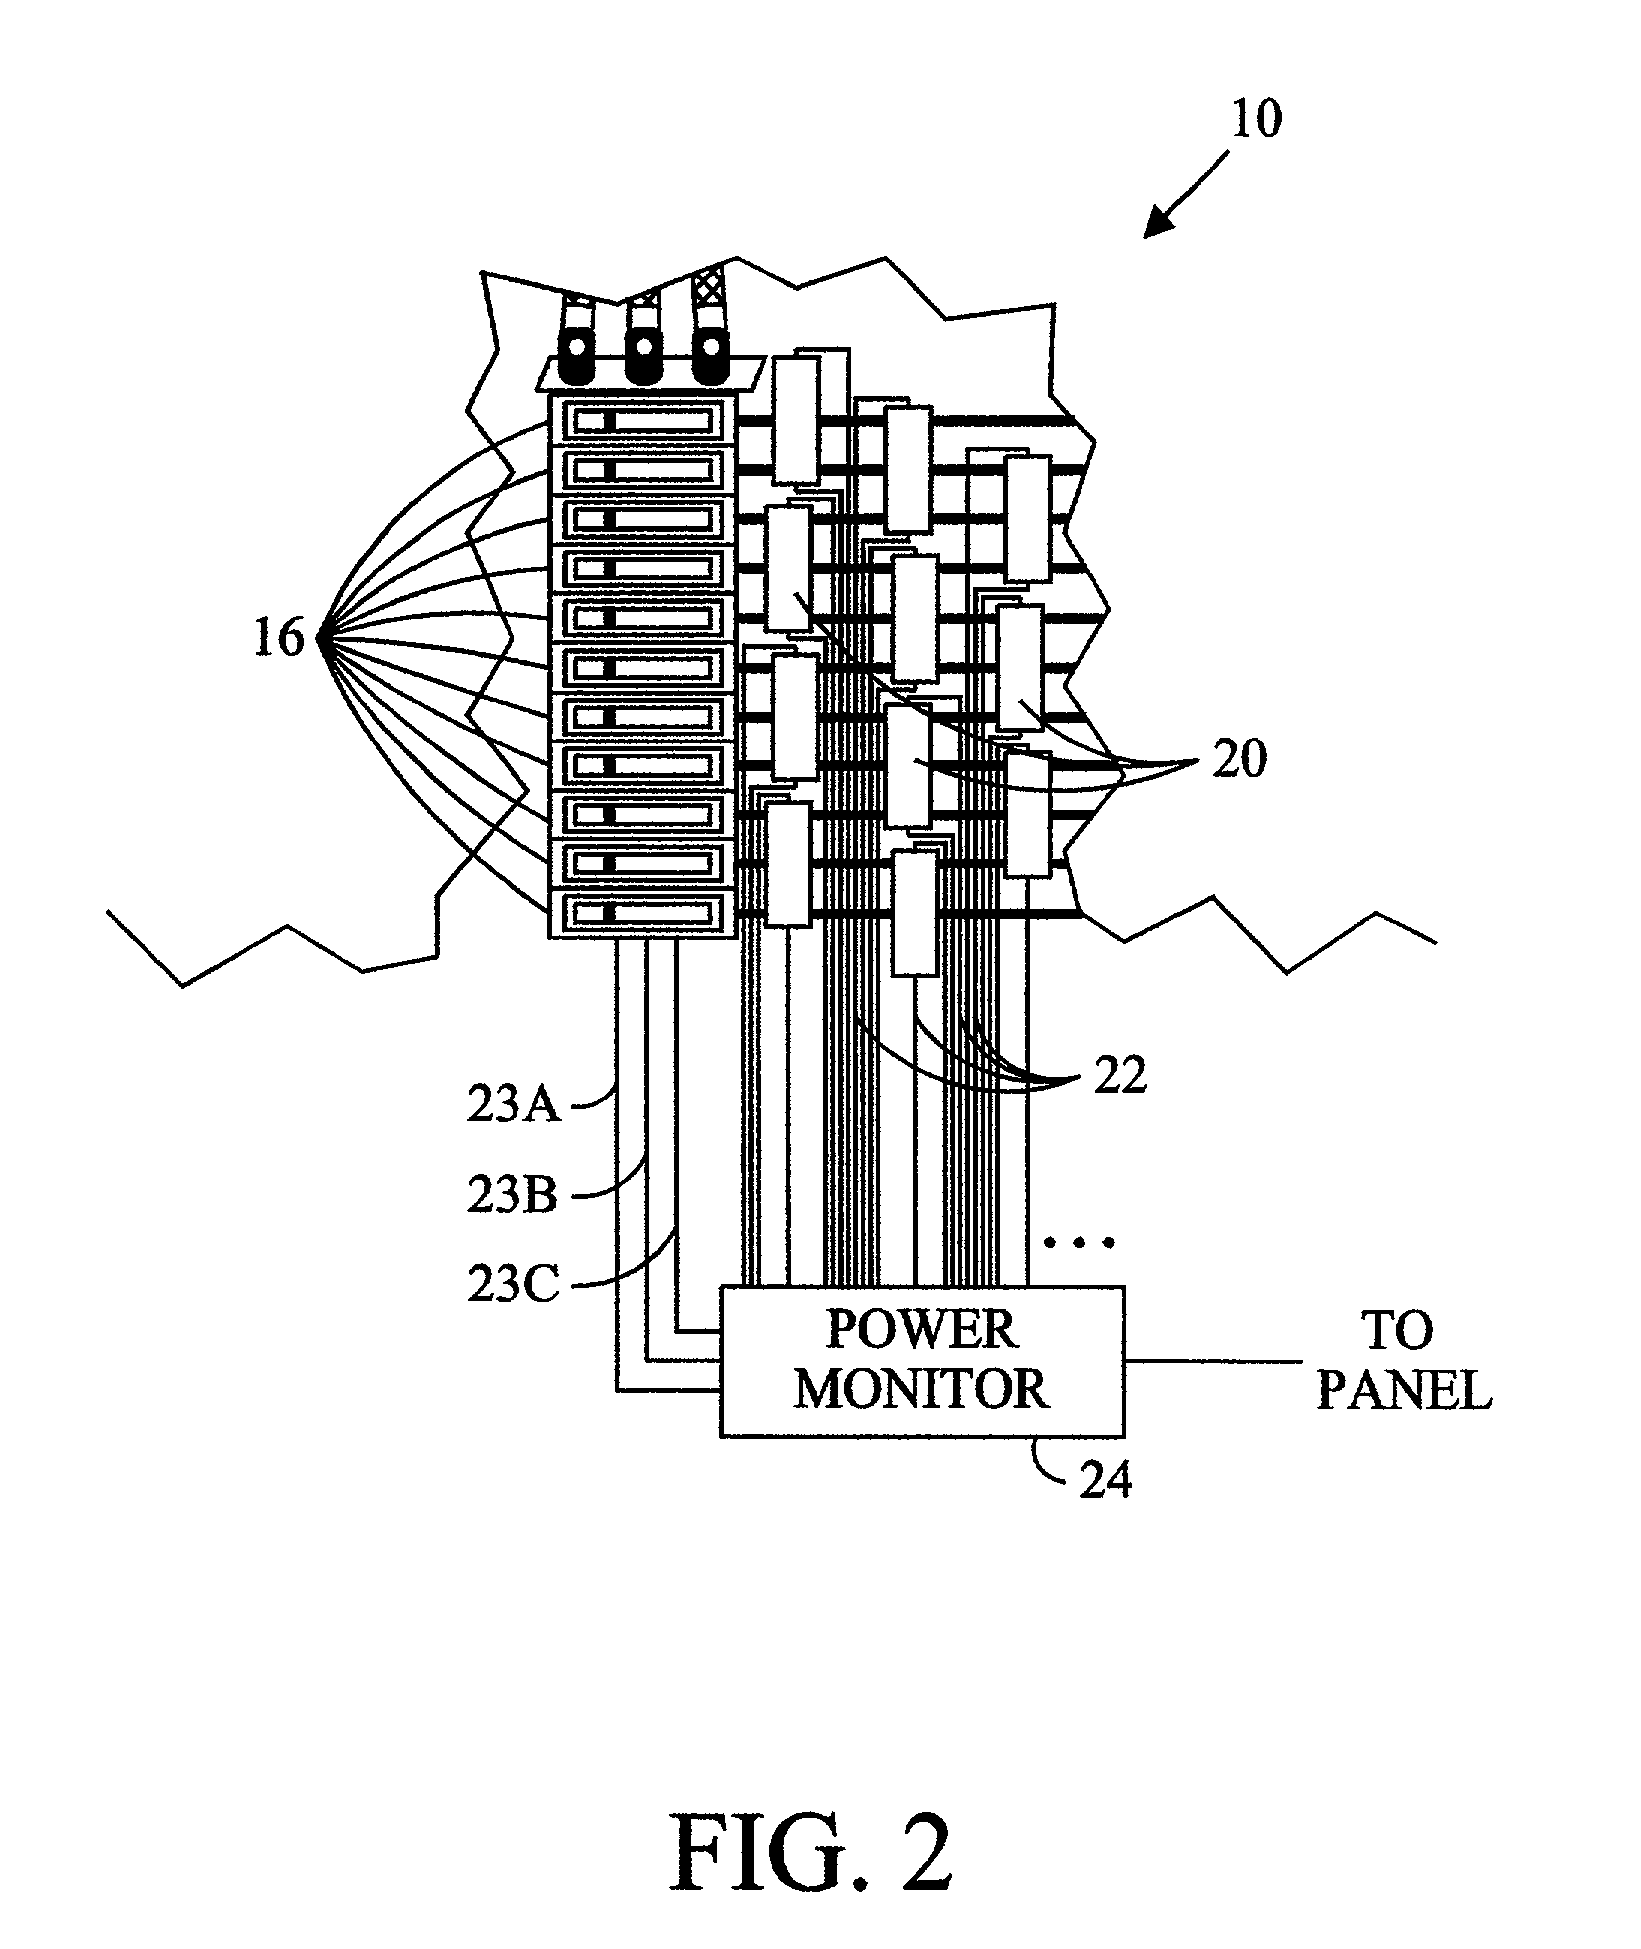 Simplified power monitoring system for electrical panels